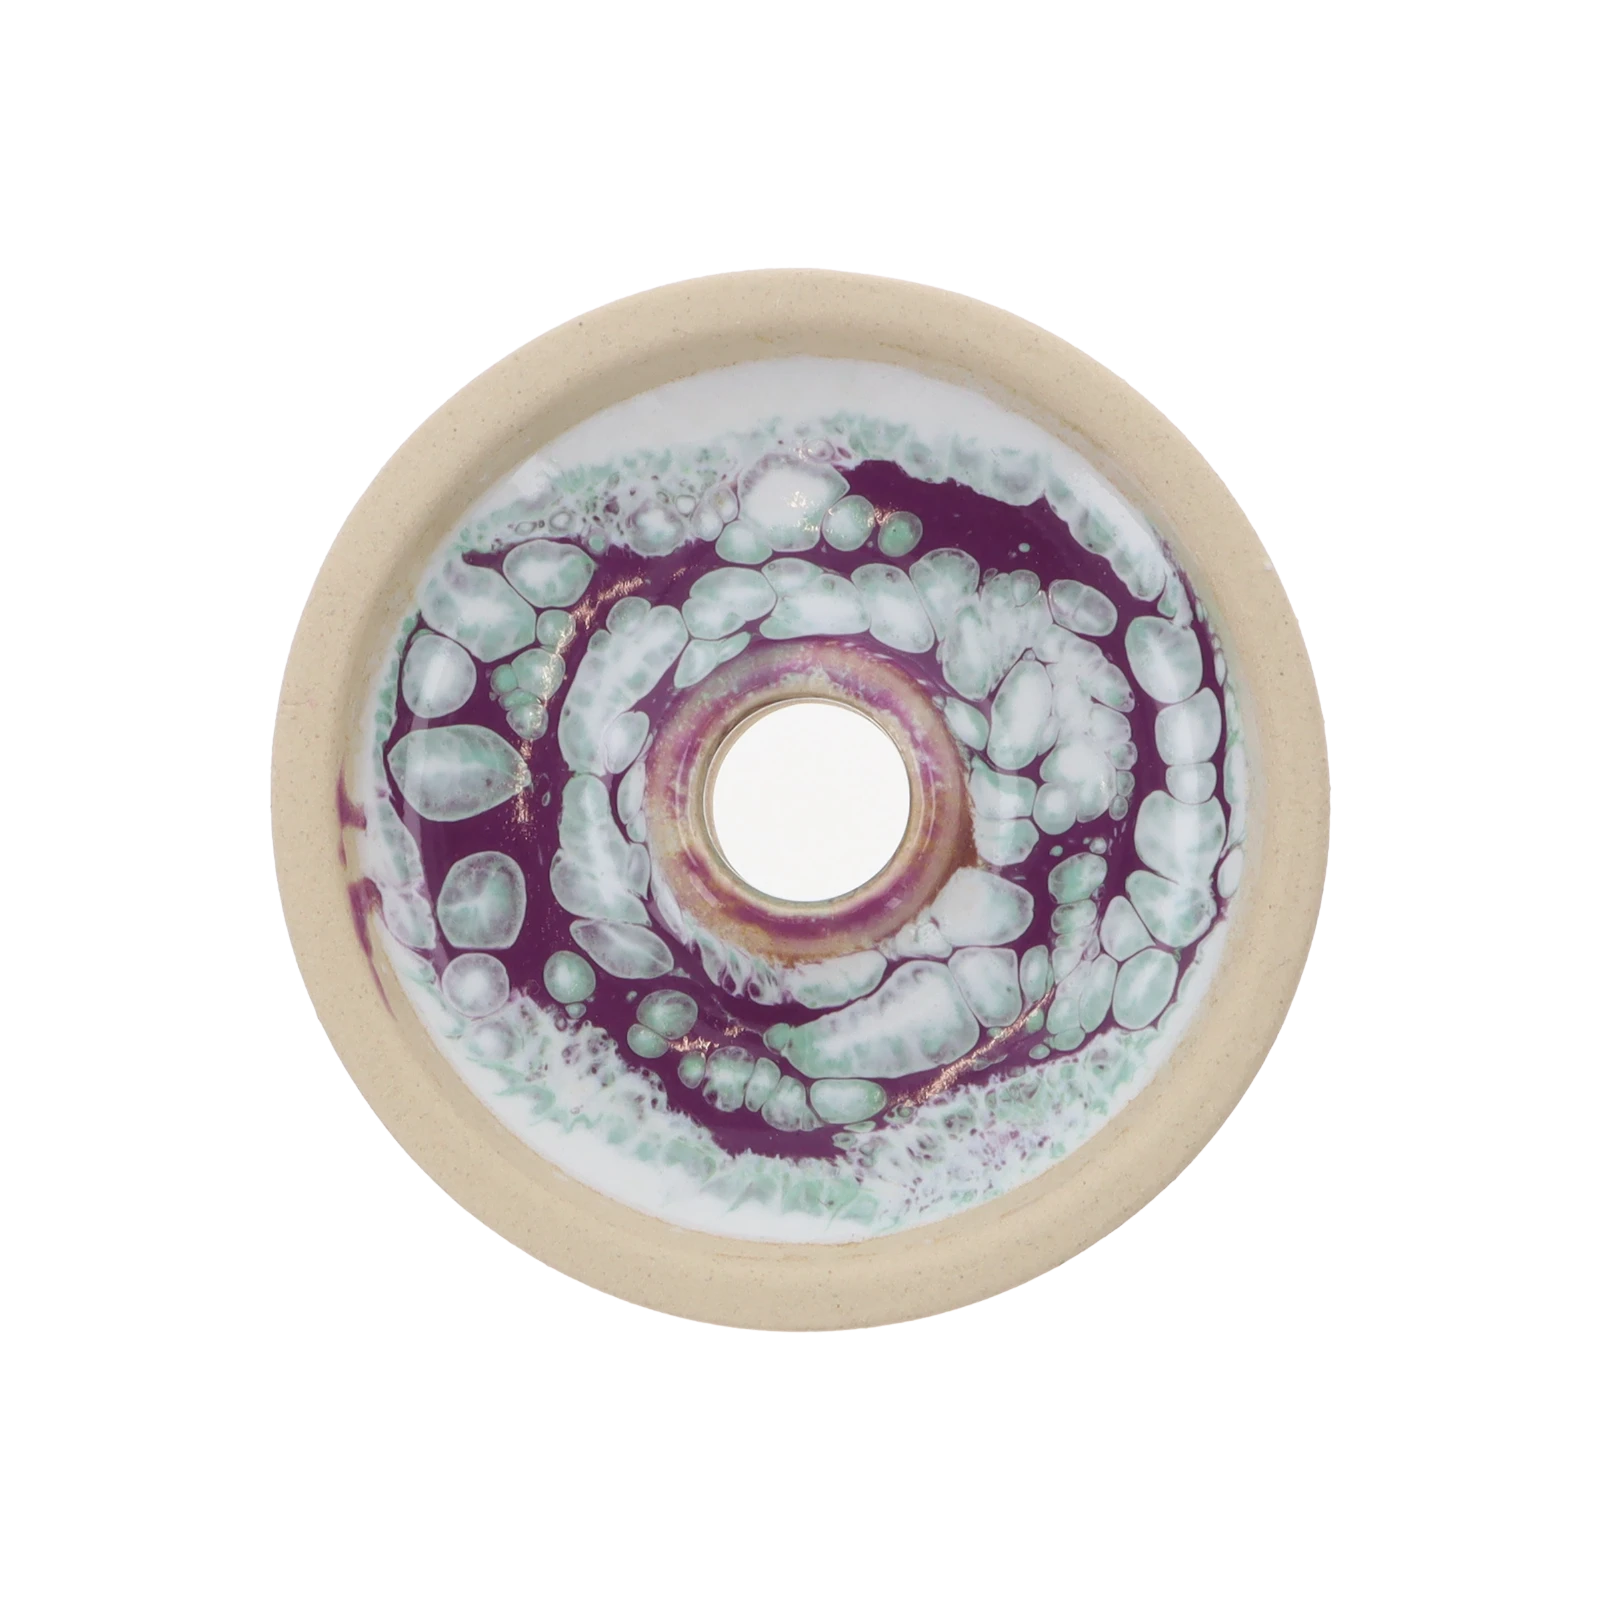 N!CE - Bowl - Phunnel - Blueberry Cassis Sorbet